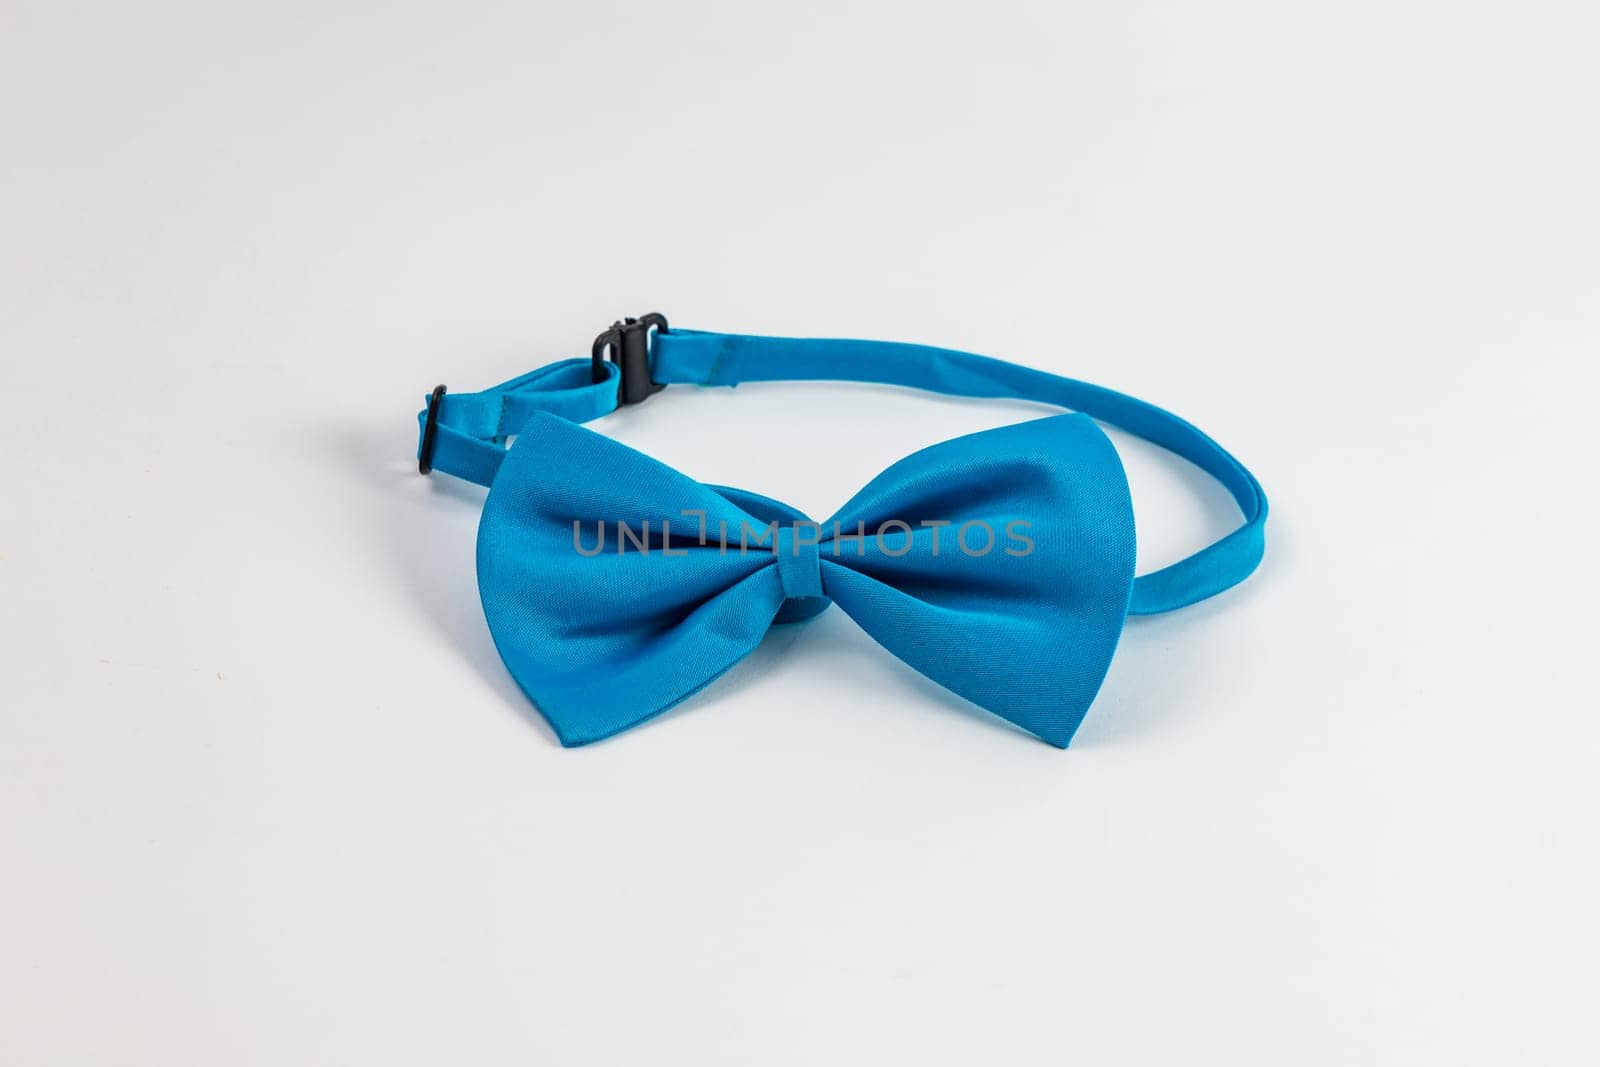 Small and blue bow tie with thin belt and plastic buckle